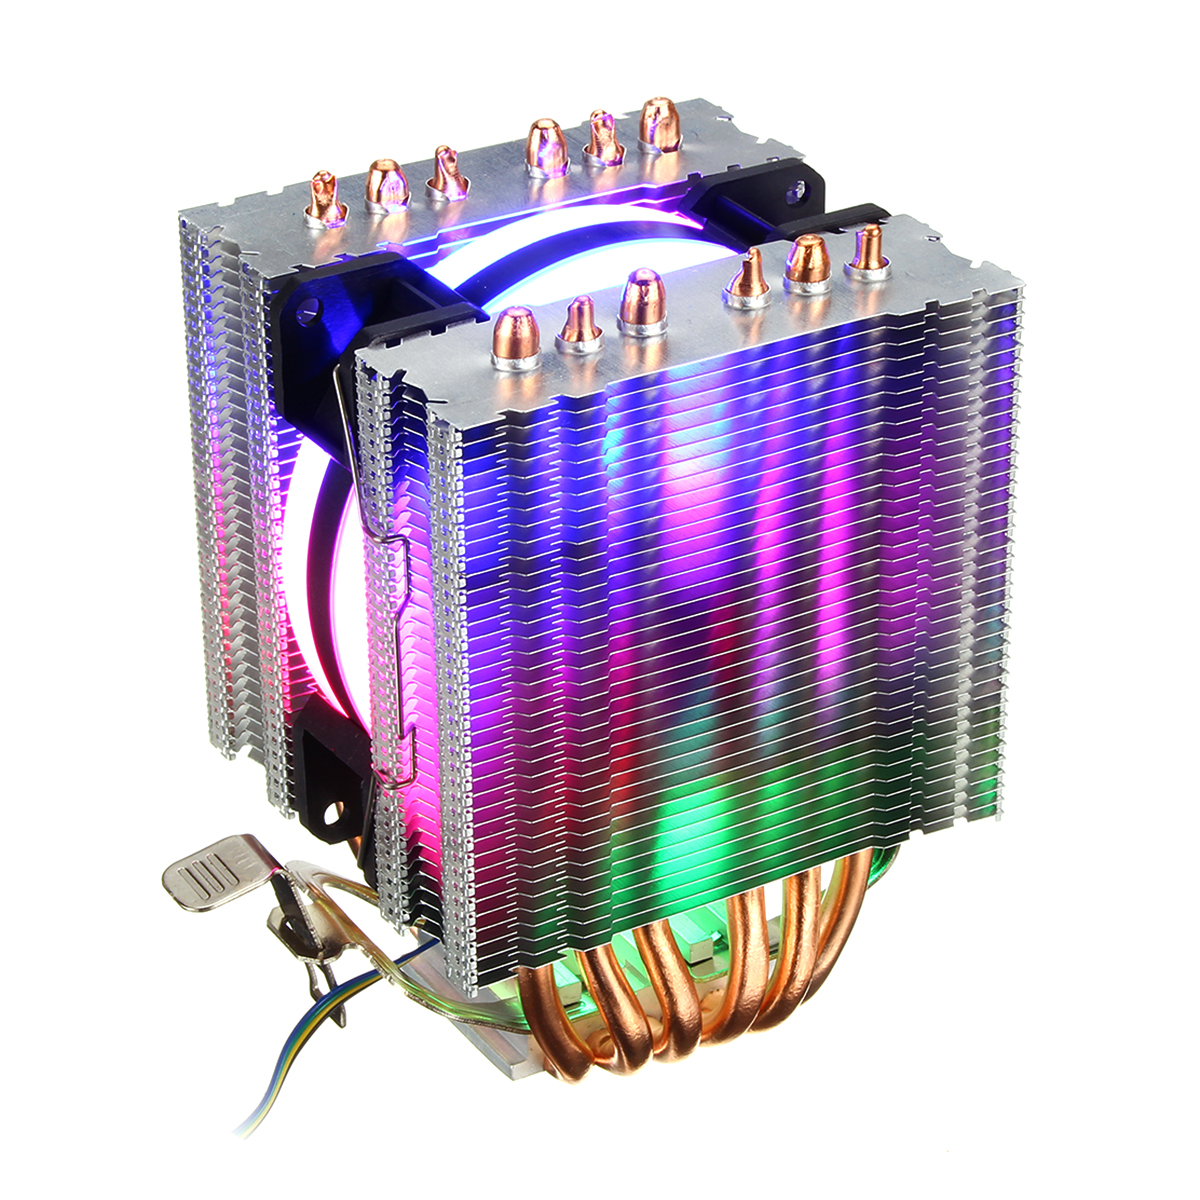 

DIY Removable CPU Cooler RGB Cooling Fan For Intel 775 1150 1151 1155 1156 1366 AMD AM4